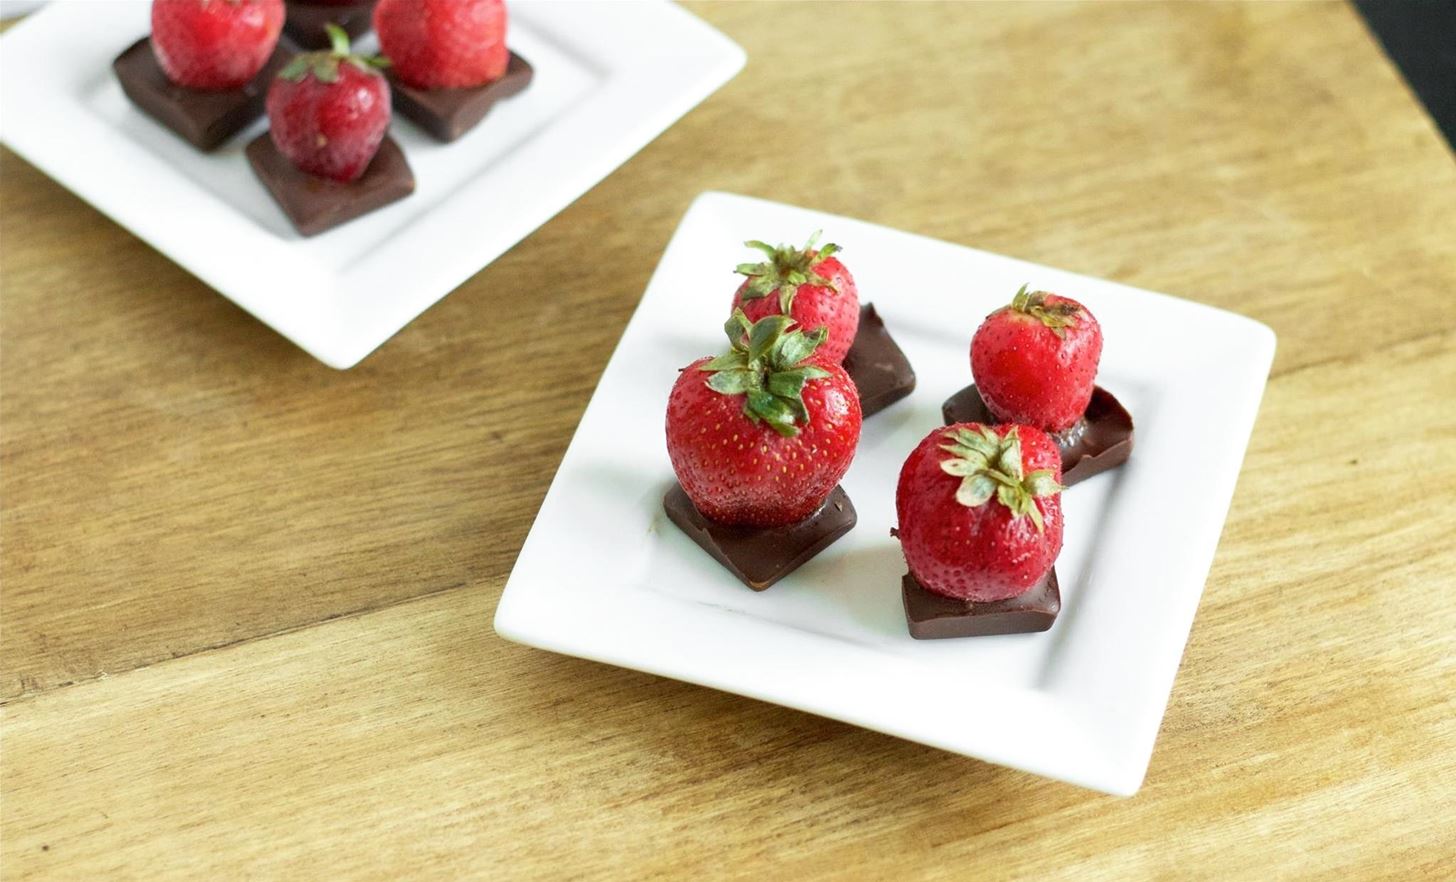 An Ice Cube Tray Is a Genius Way to Make Chocolate-Covered Stawberries